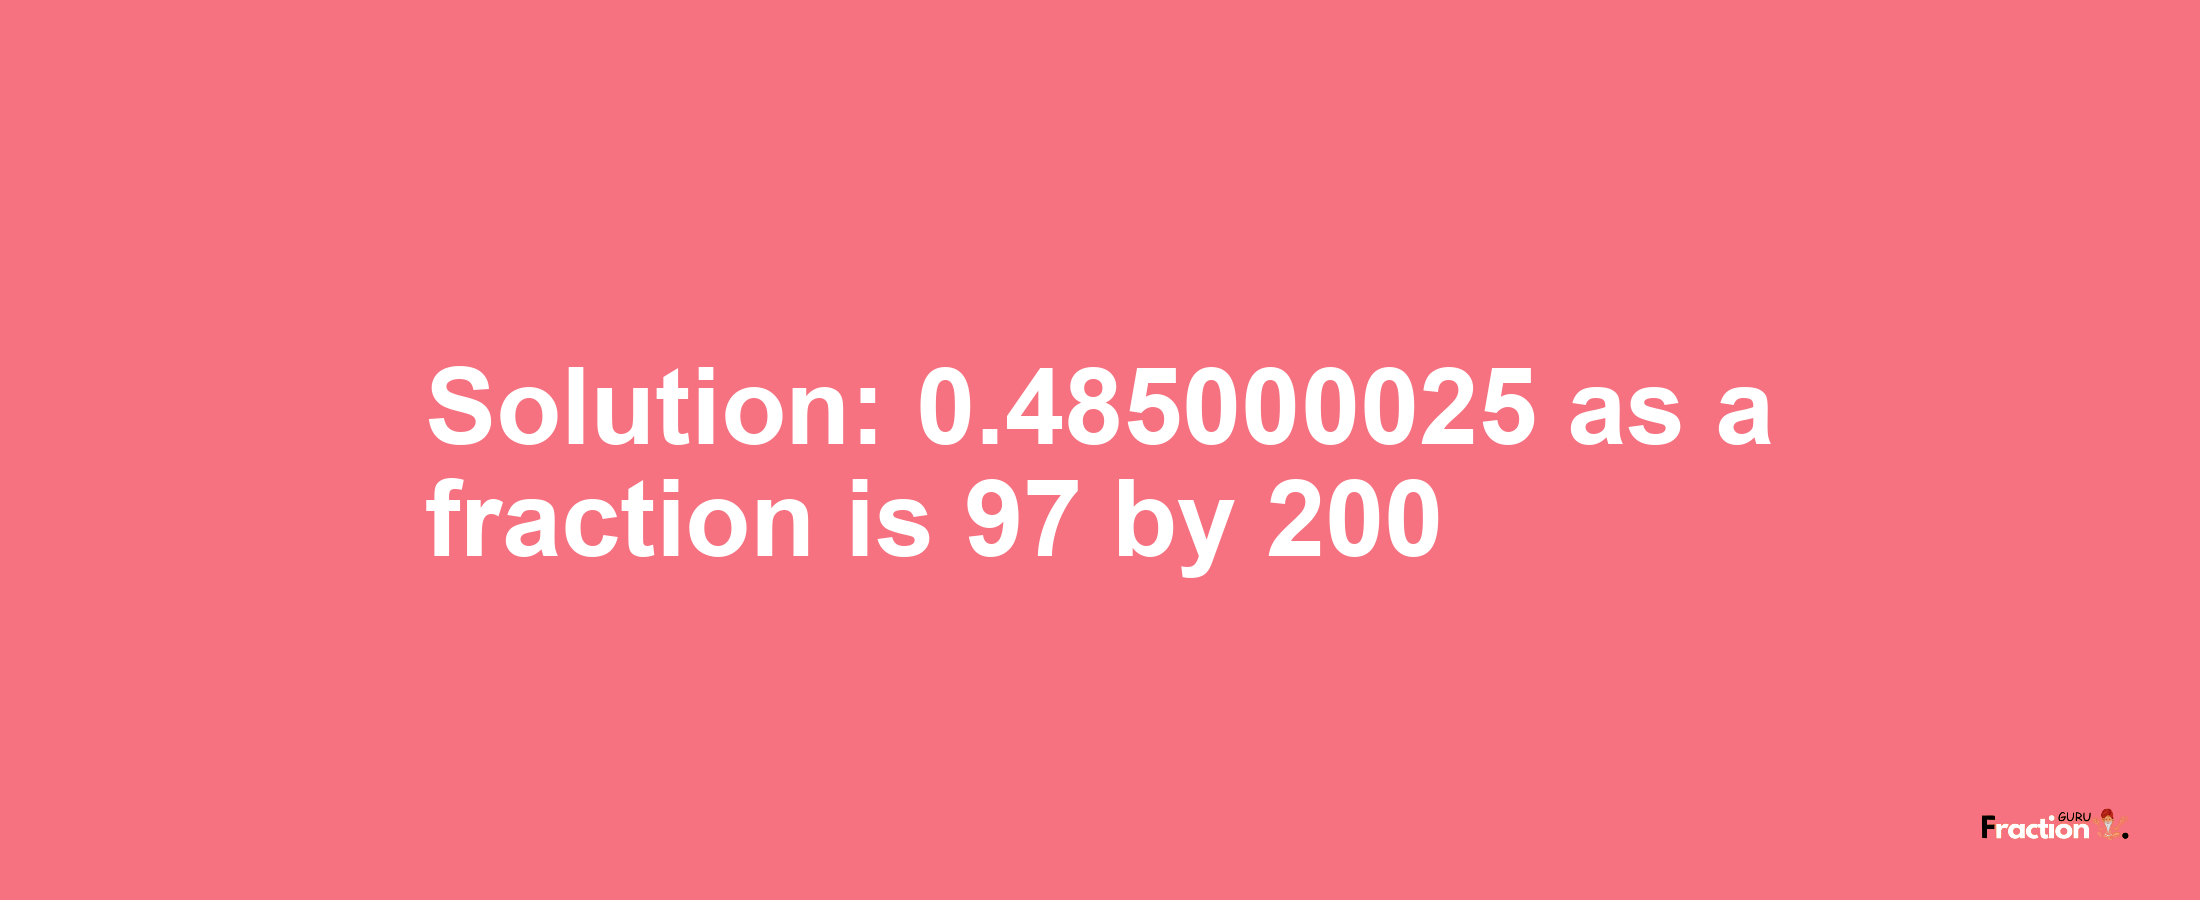 Solution:0.485000025 as a fraction is 97/200